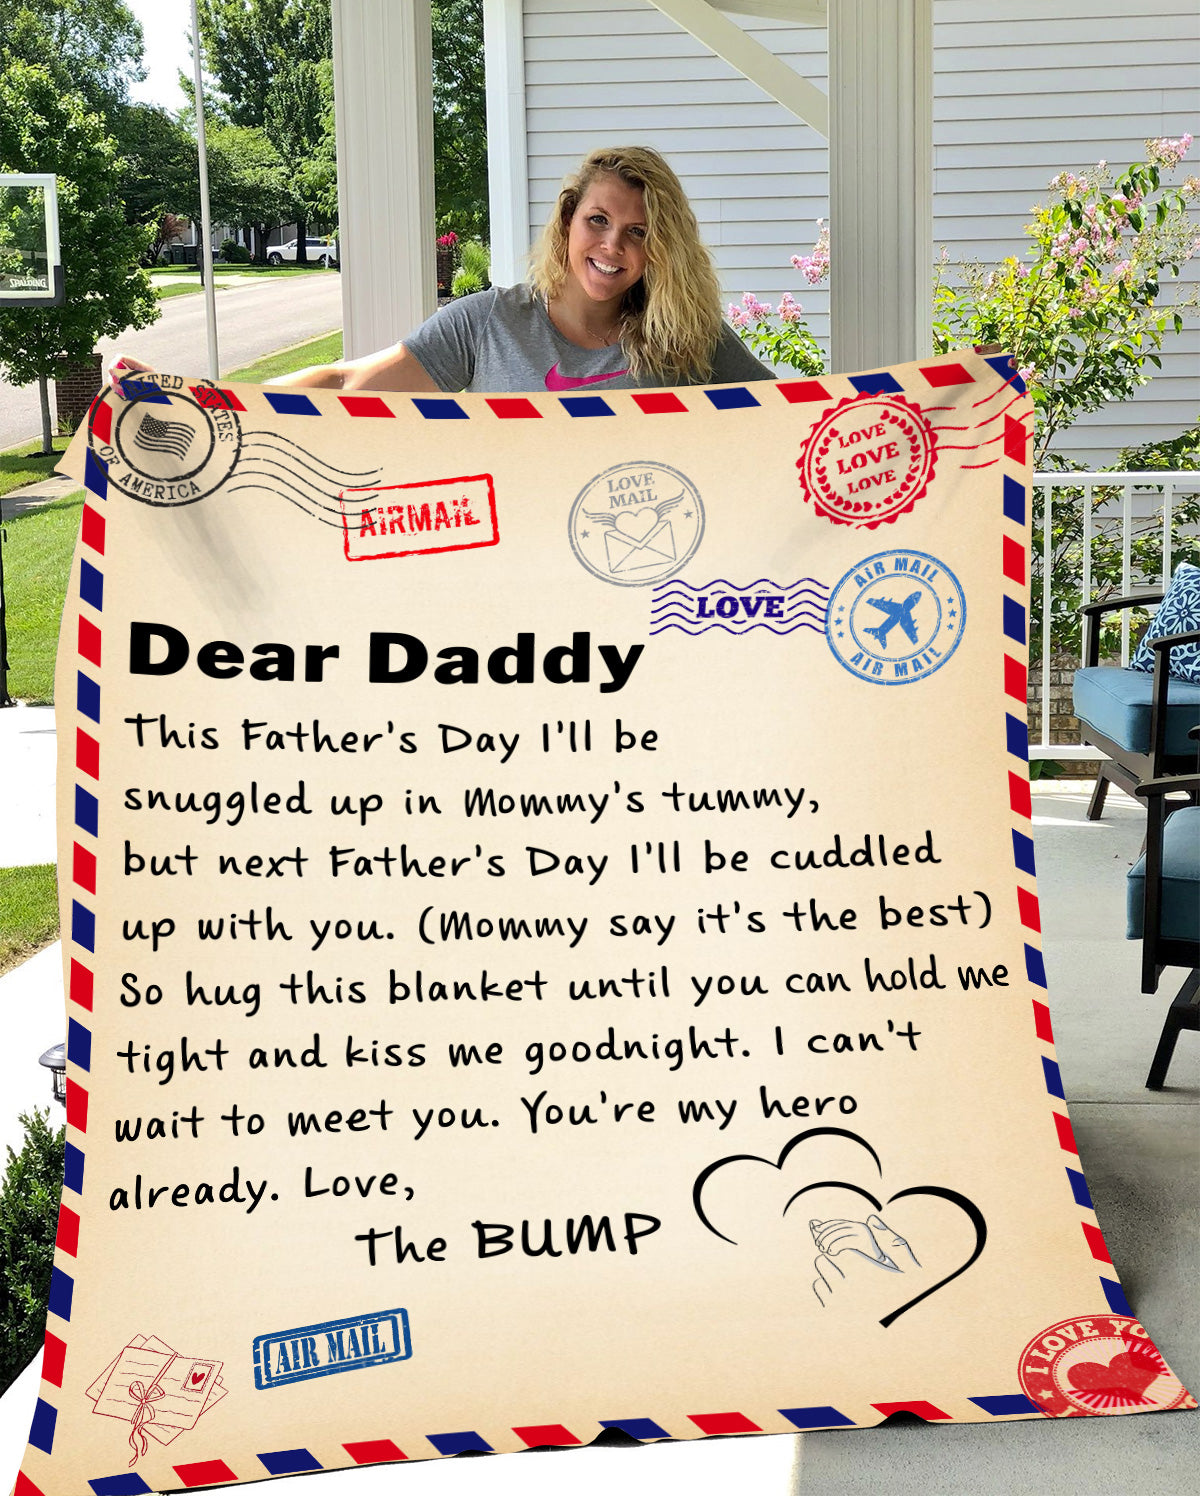 Daddy from Bump Father's Day Message Blanket